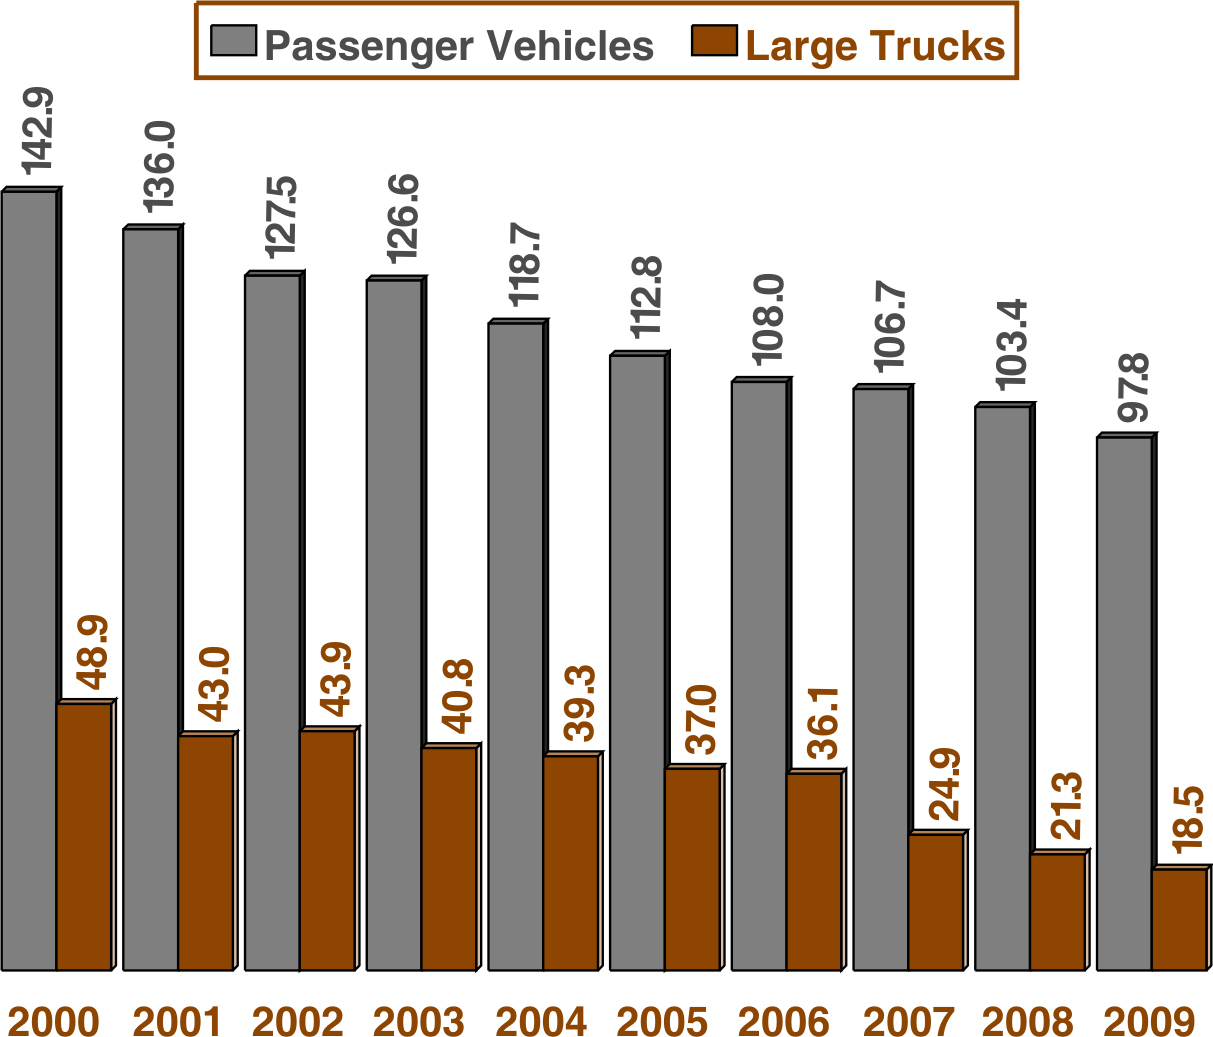 Bar Chart: Large trucks and passenger vehicles involved in injury crashes, 2000 through 2009. 
Data for large trucks: 
2000=48.9, 
2001=43.0, 
2002=43.9, 
2003=40.8, 
2004=39.3, 
2005=37.0, 
2006=36.1, 
2007=24.9, 
2008=21.3,
2009=18.5. 
Data for passenger vehicles: 
2000=142.9, 
2001=136.0, 
2002=127.5, 
2003=126.6, 
2004=118.7, 
2005=112.8, 
2006=108.0,  
2007=106.7,  
2008=103.4,
2009=97.8.